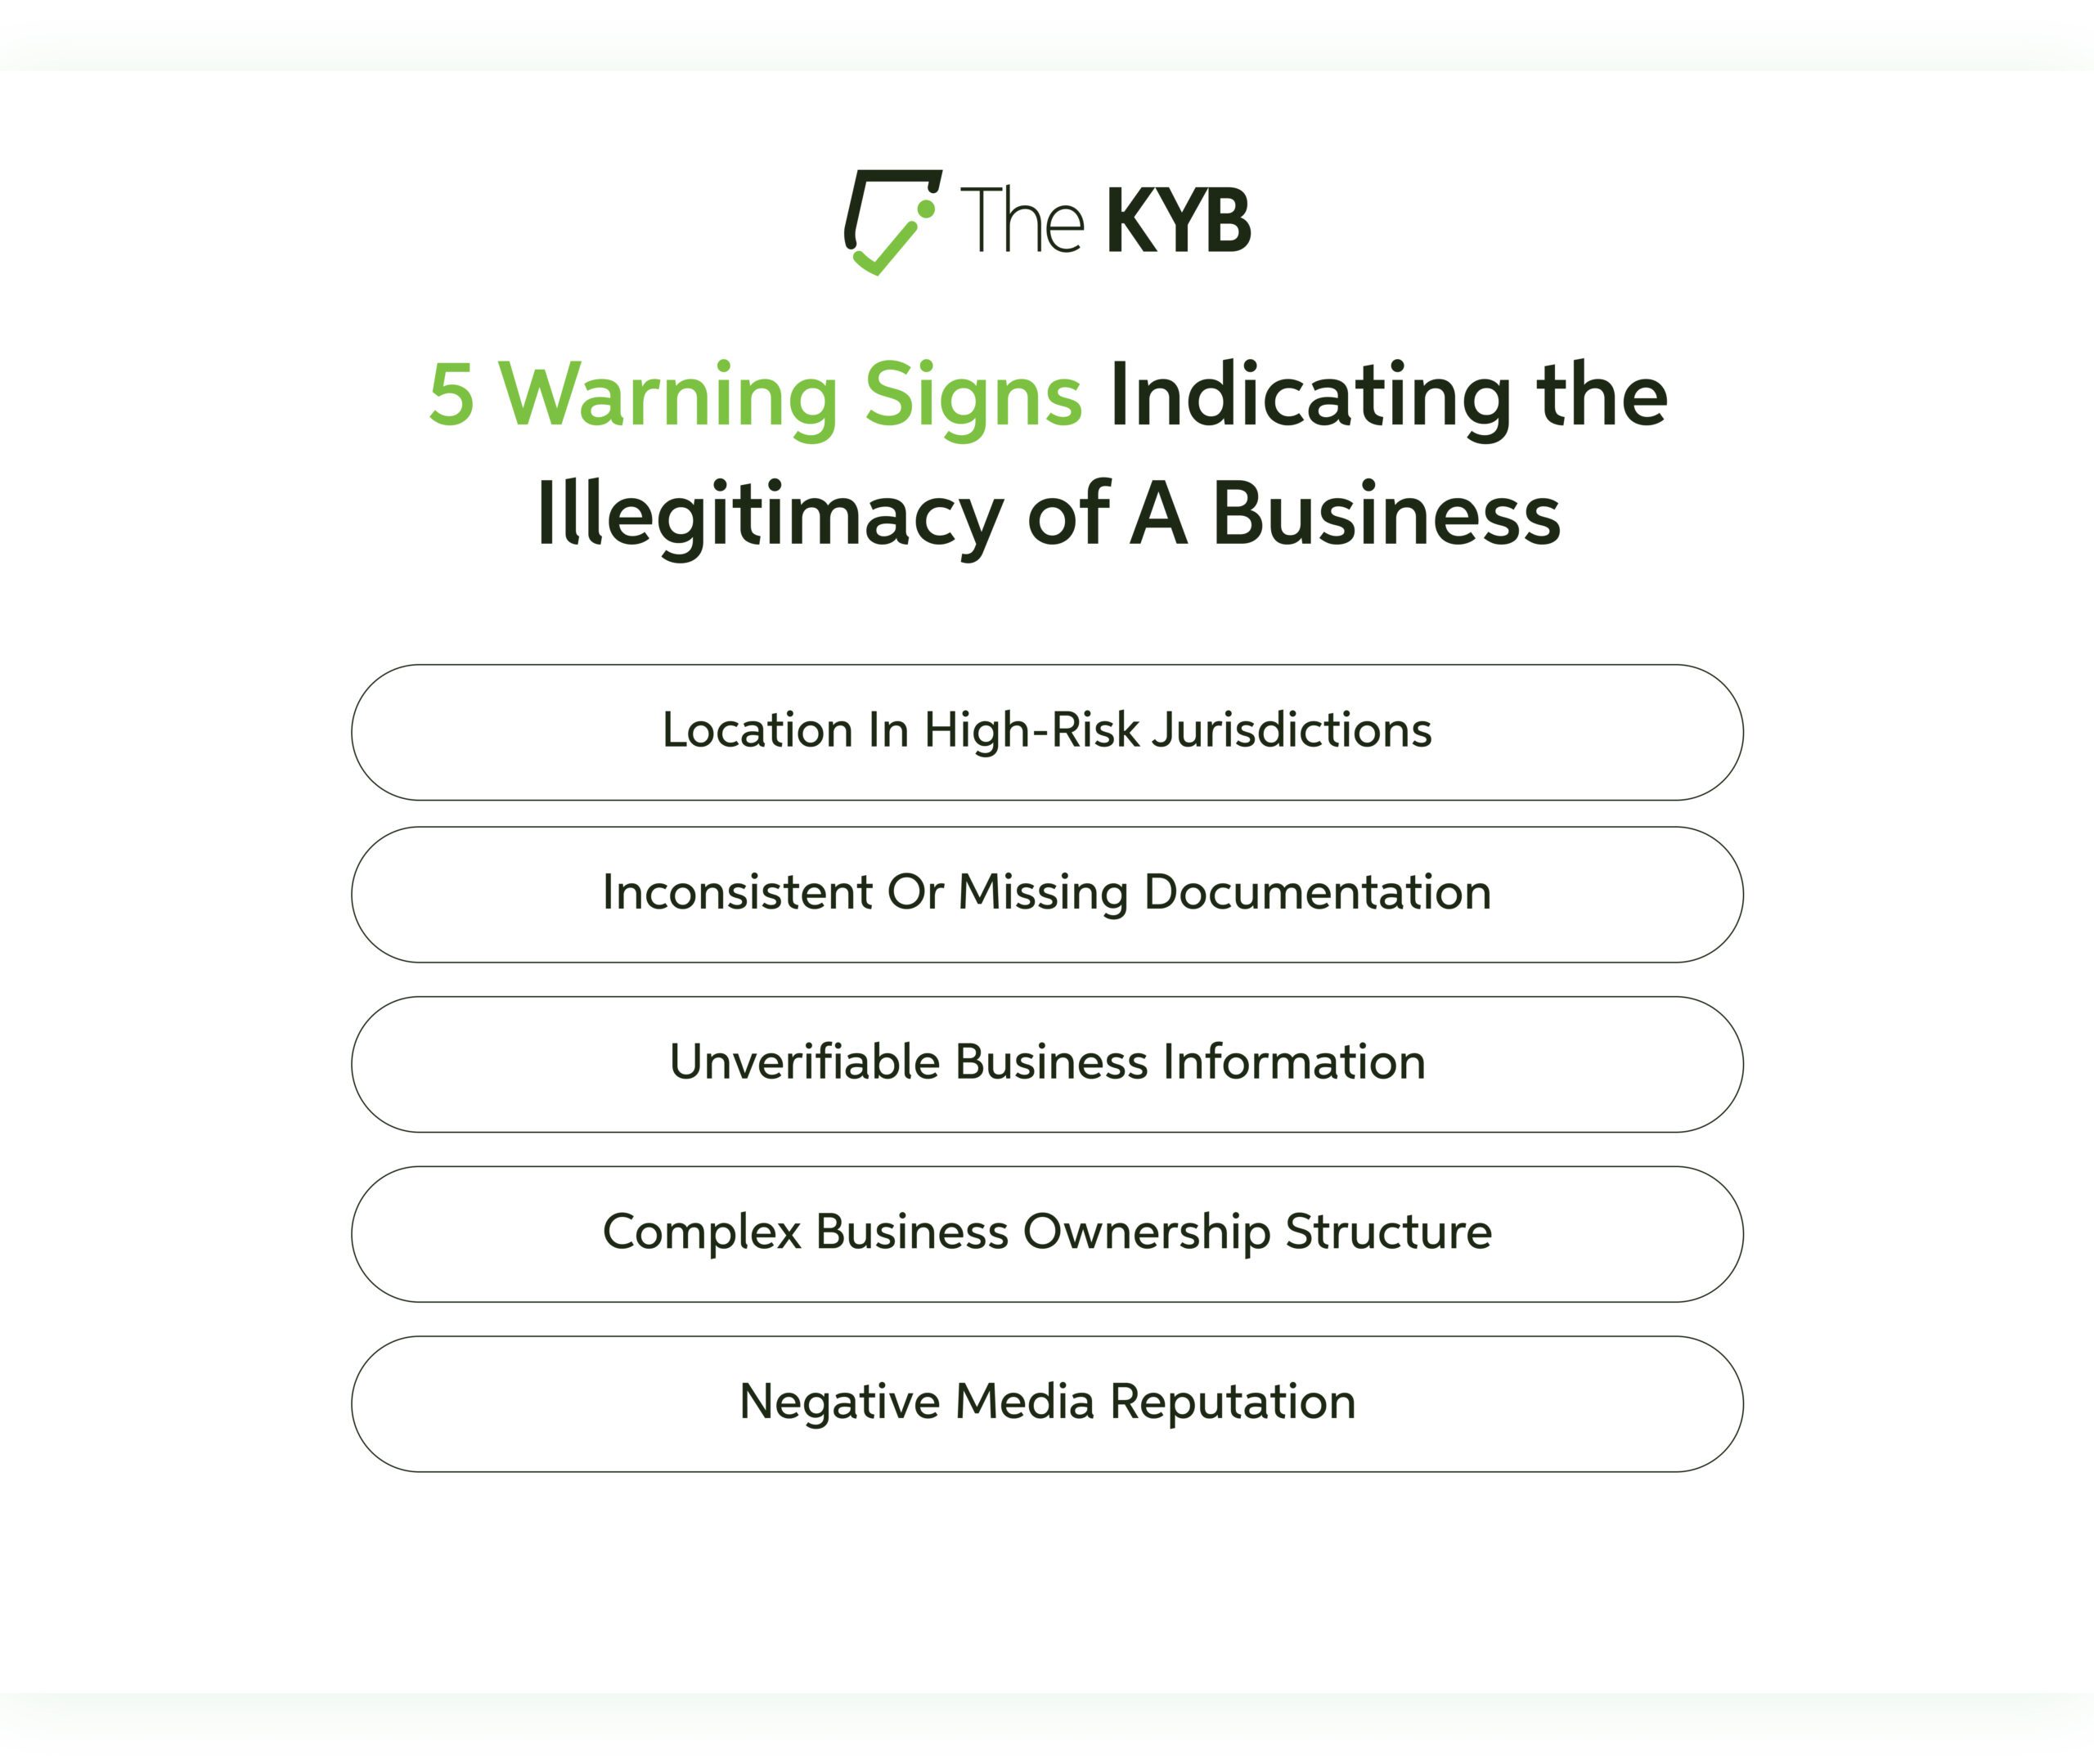 5 Warning Signs Indicating the Illegitimacy of A Business